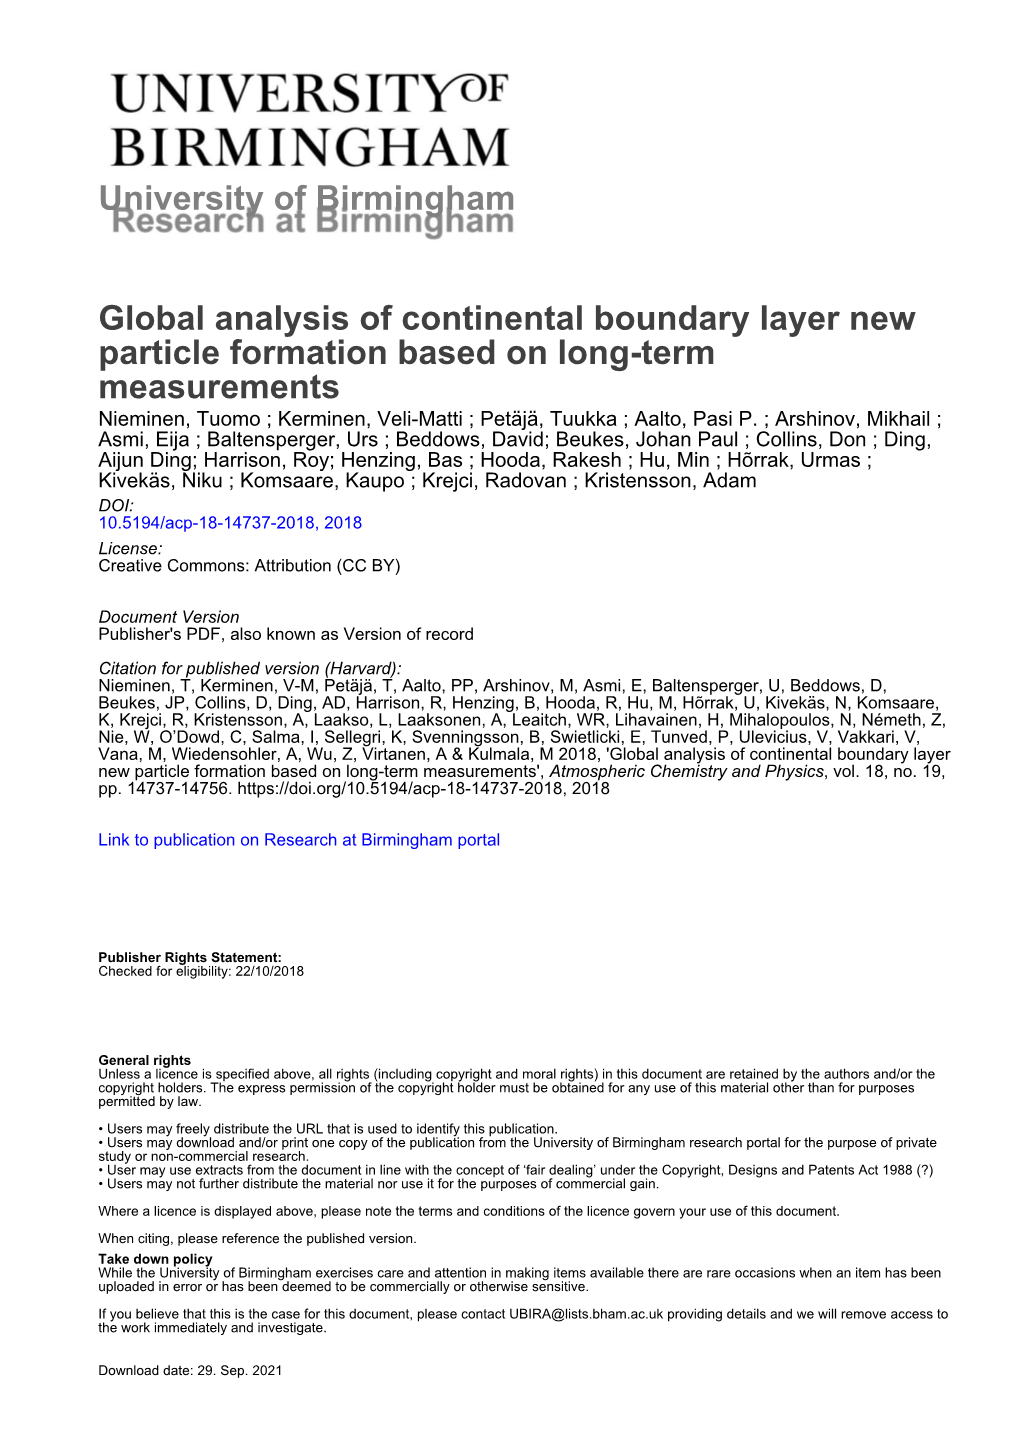 Global Analysis of Continental Boundary Layer New Particle Formation Based on Long-Term Measurements